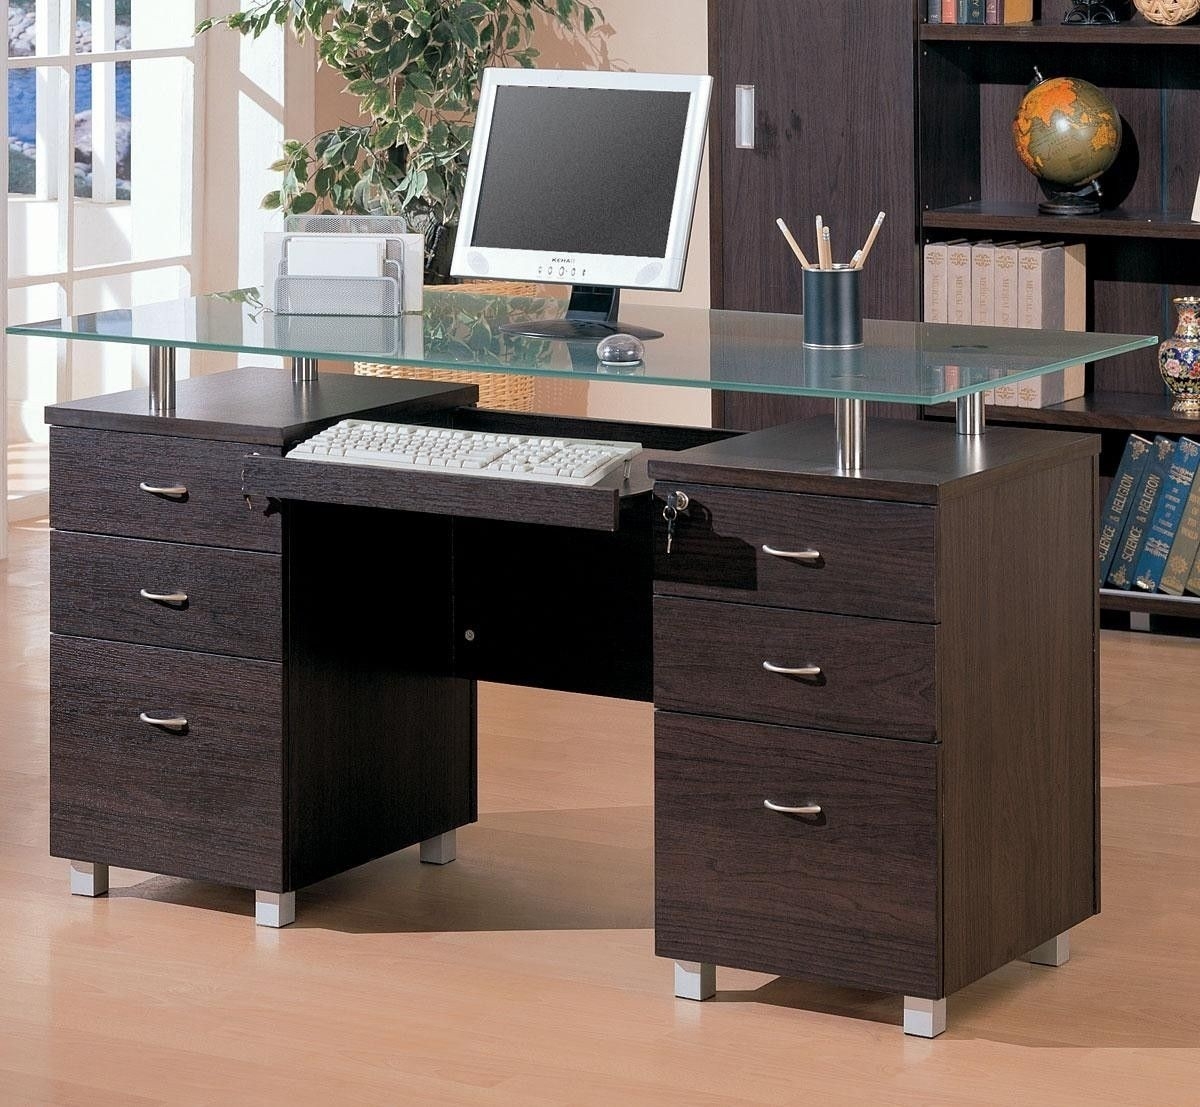 Desk With Locking Drawers - Foter